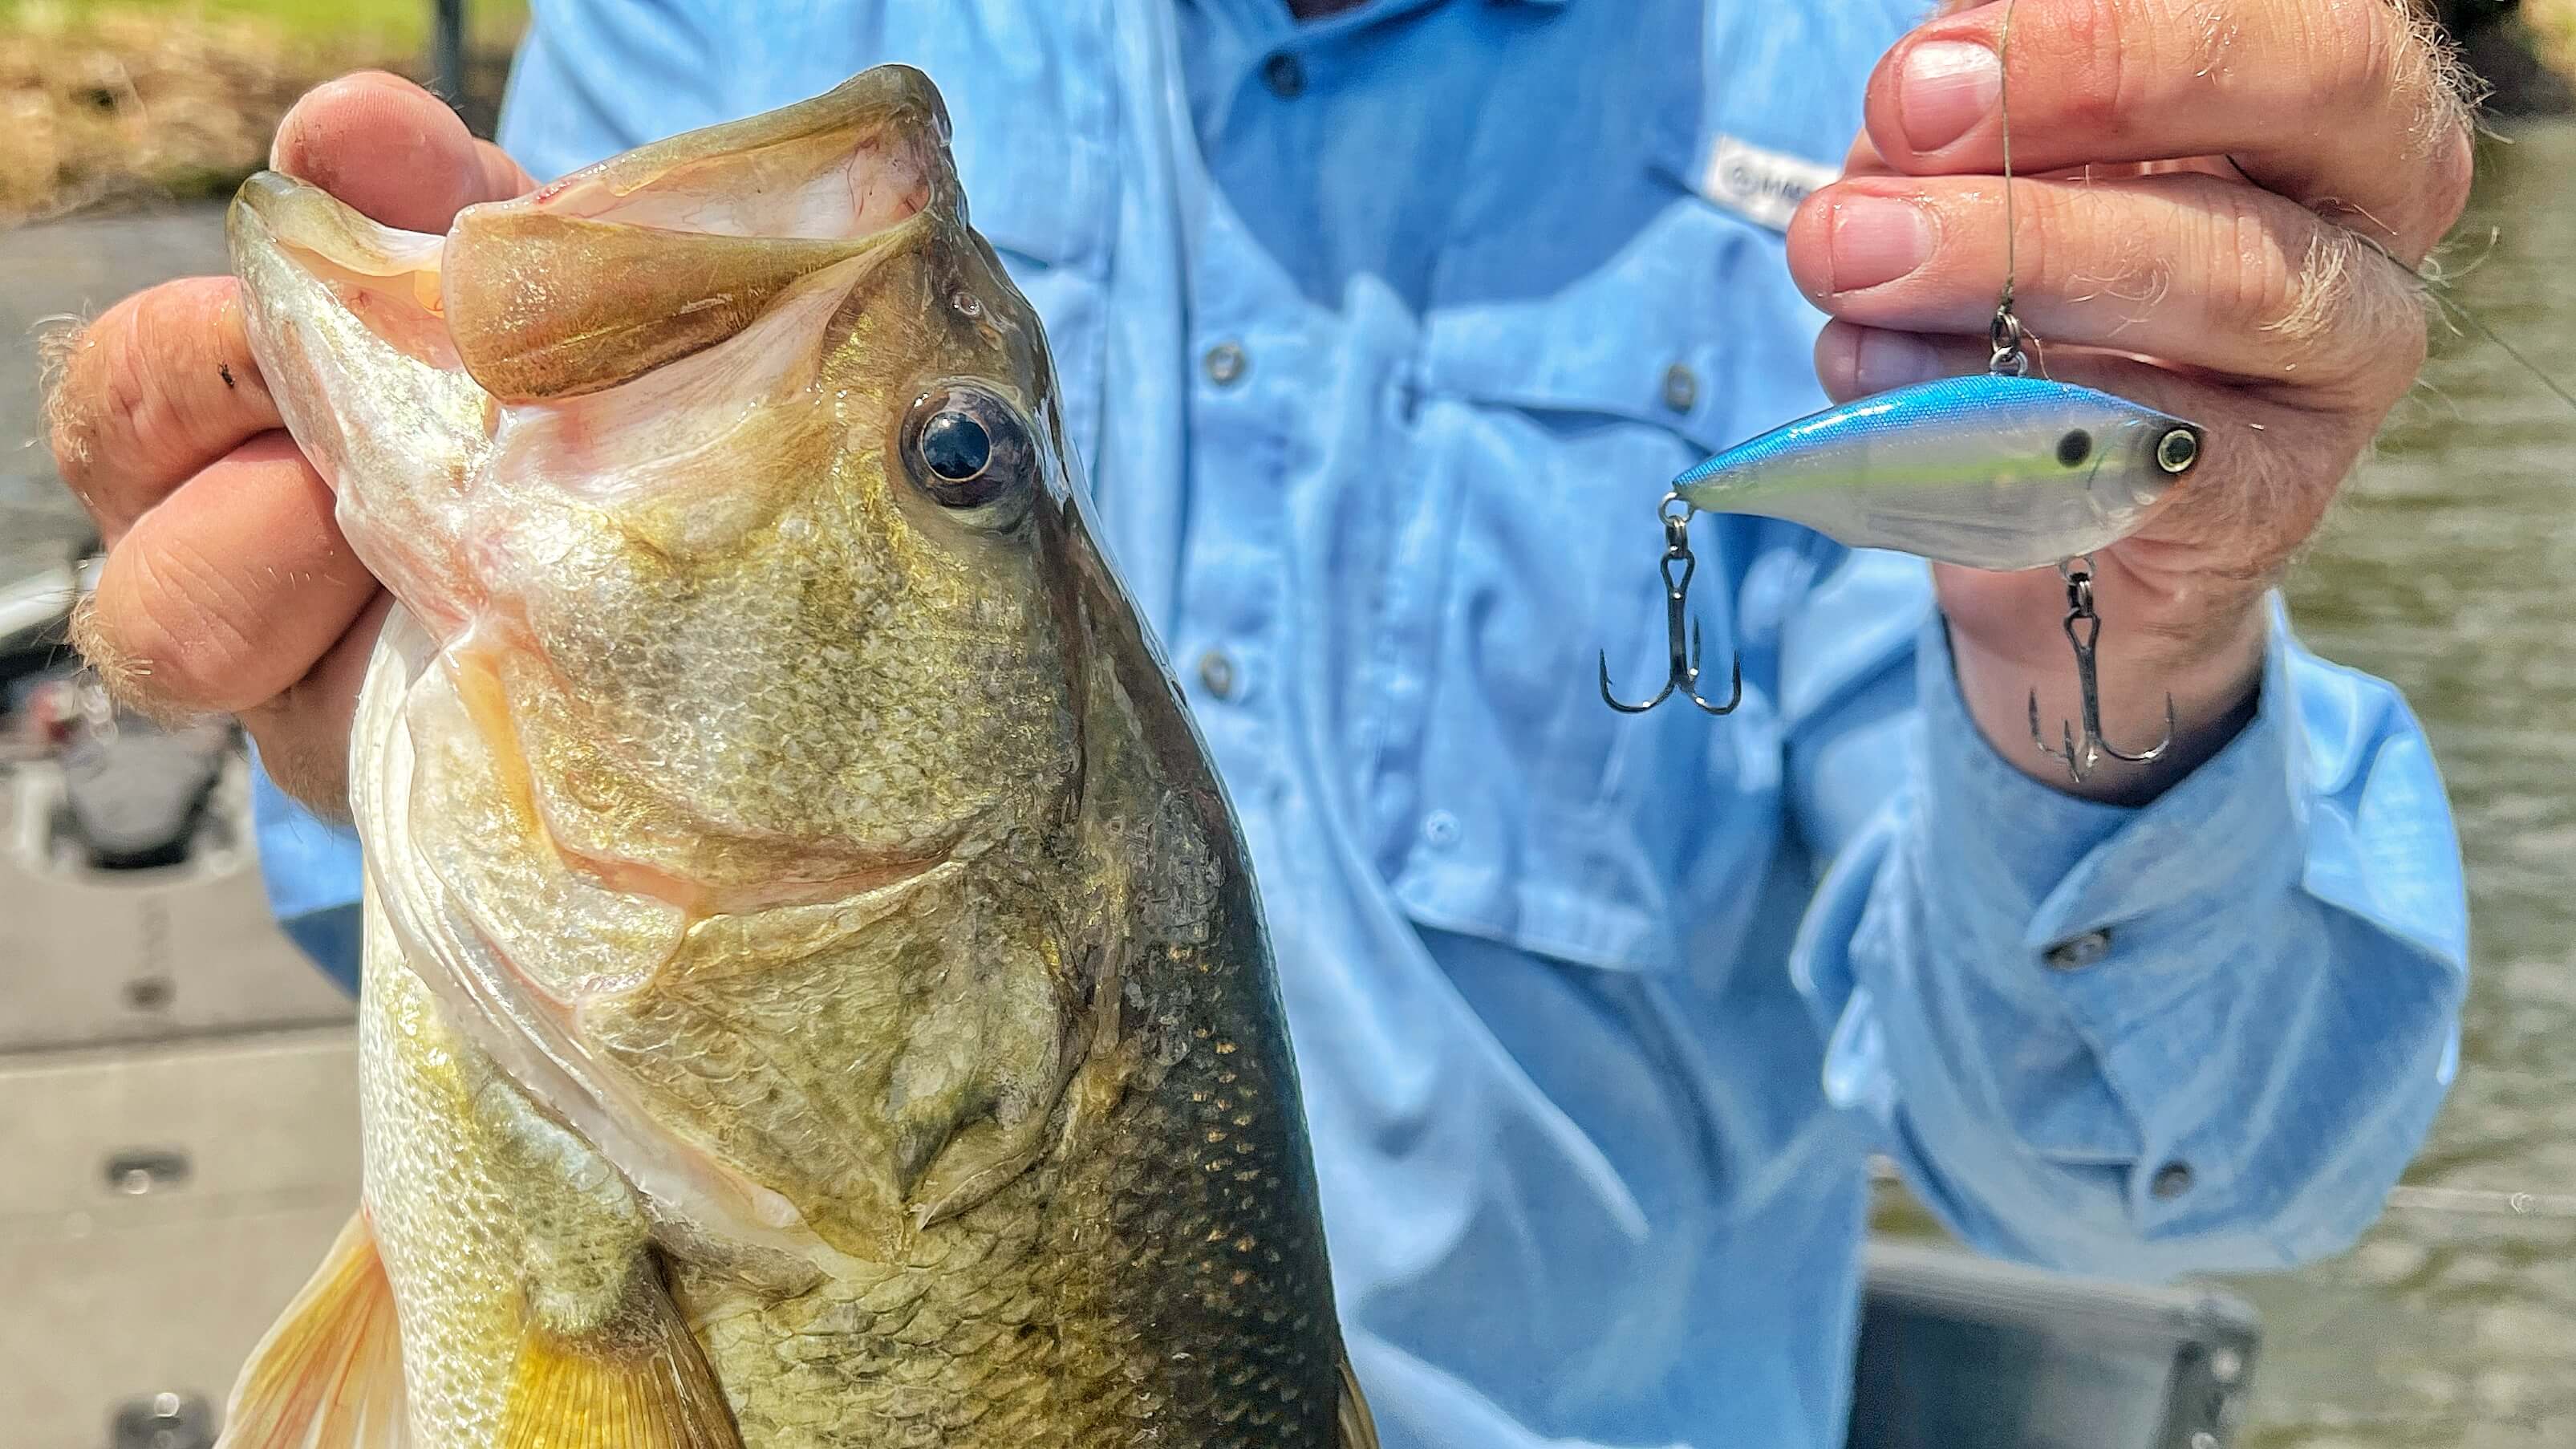 How to Choose the Right Lipless Crankbait for any Situation